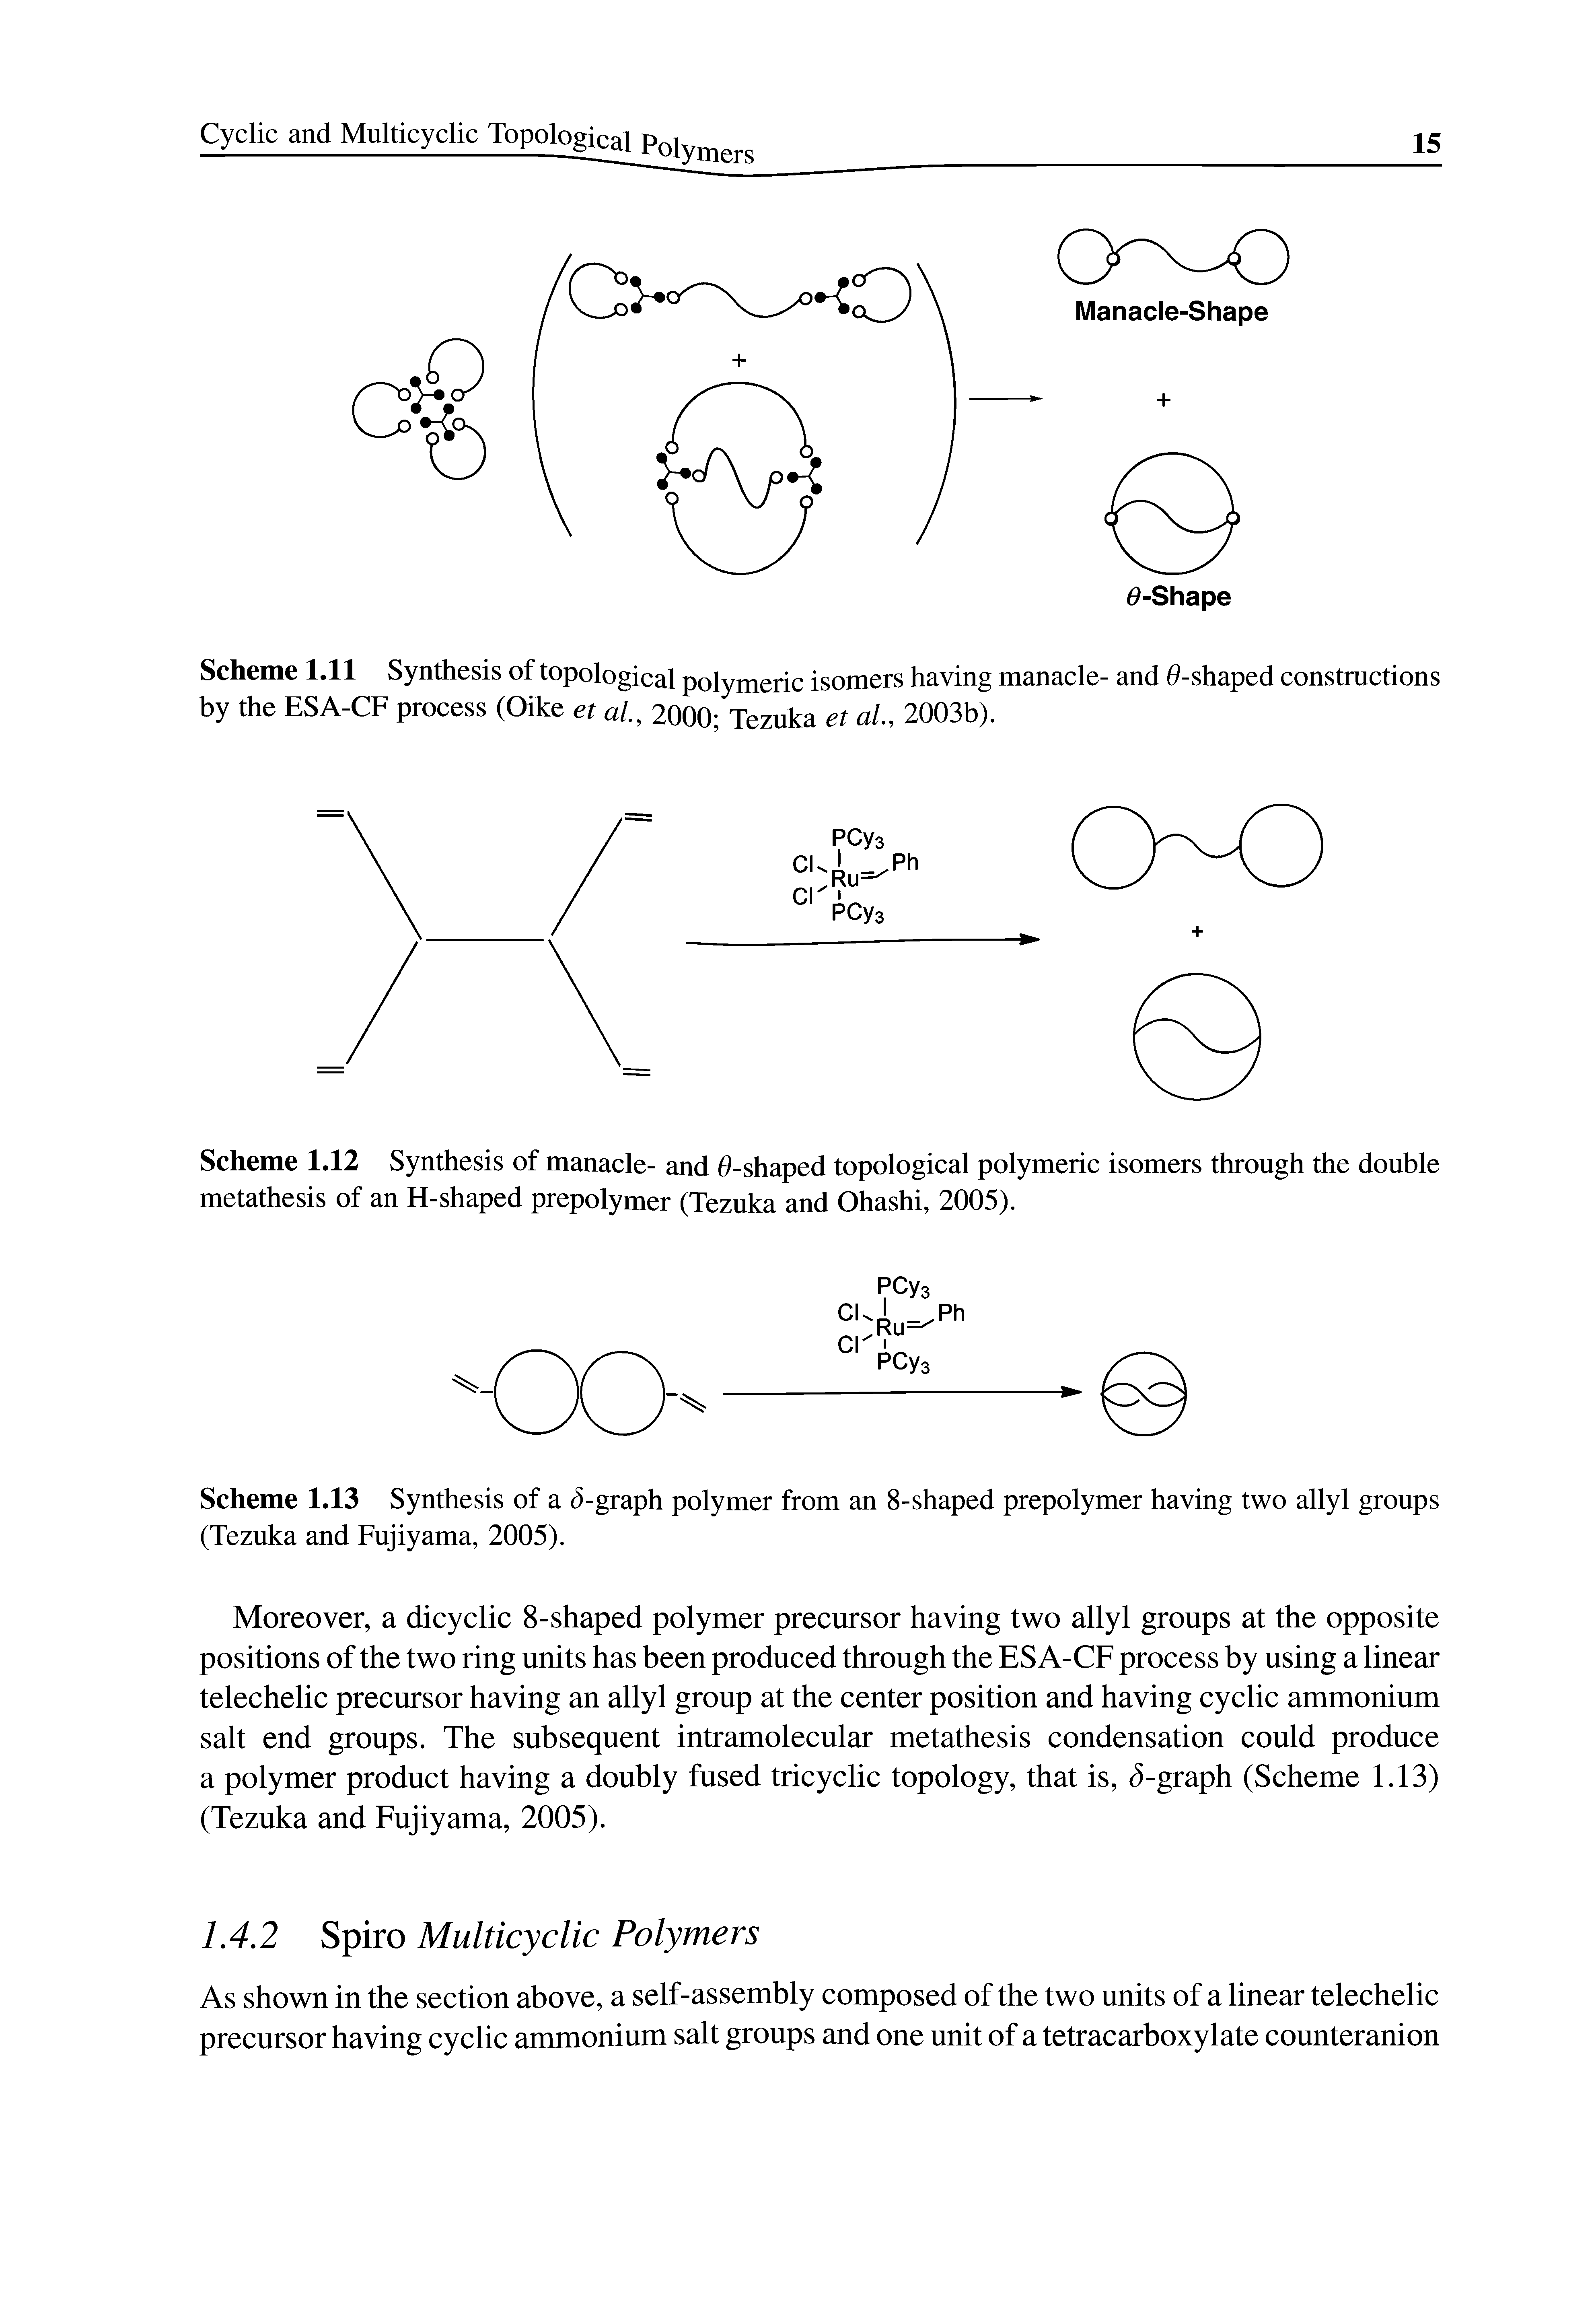 Scheme 1.12 Synthesis of manacle- and 0-shaped topological polymeric isomers through the double metathesis of an H-shaped prepolymer (Tezuka and Ohashi, 2005).